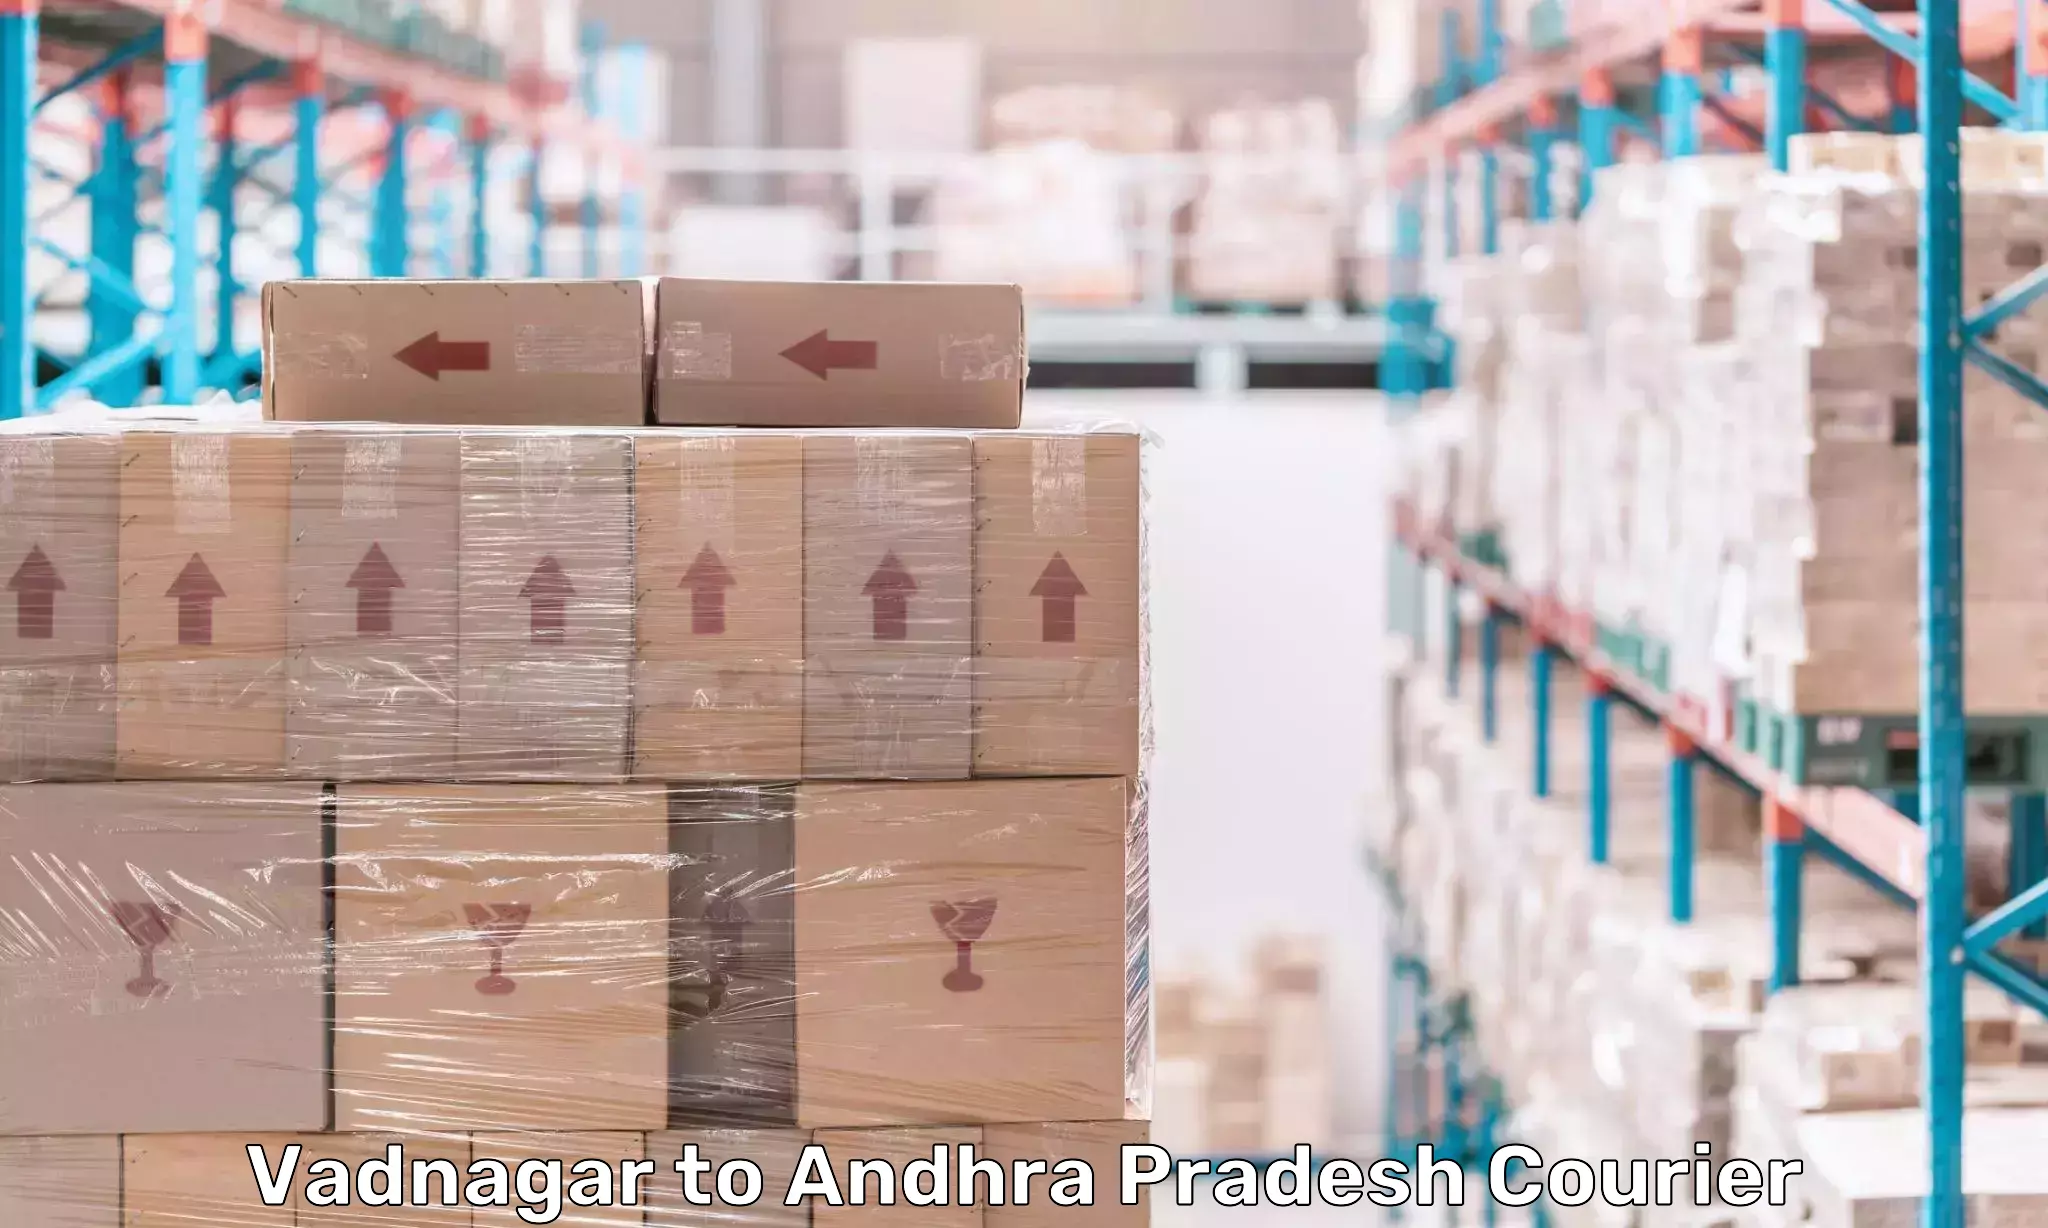 State-of-the-art courier technology Vadnagar to Andhra Pradesh